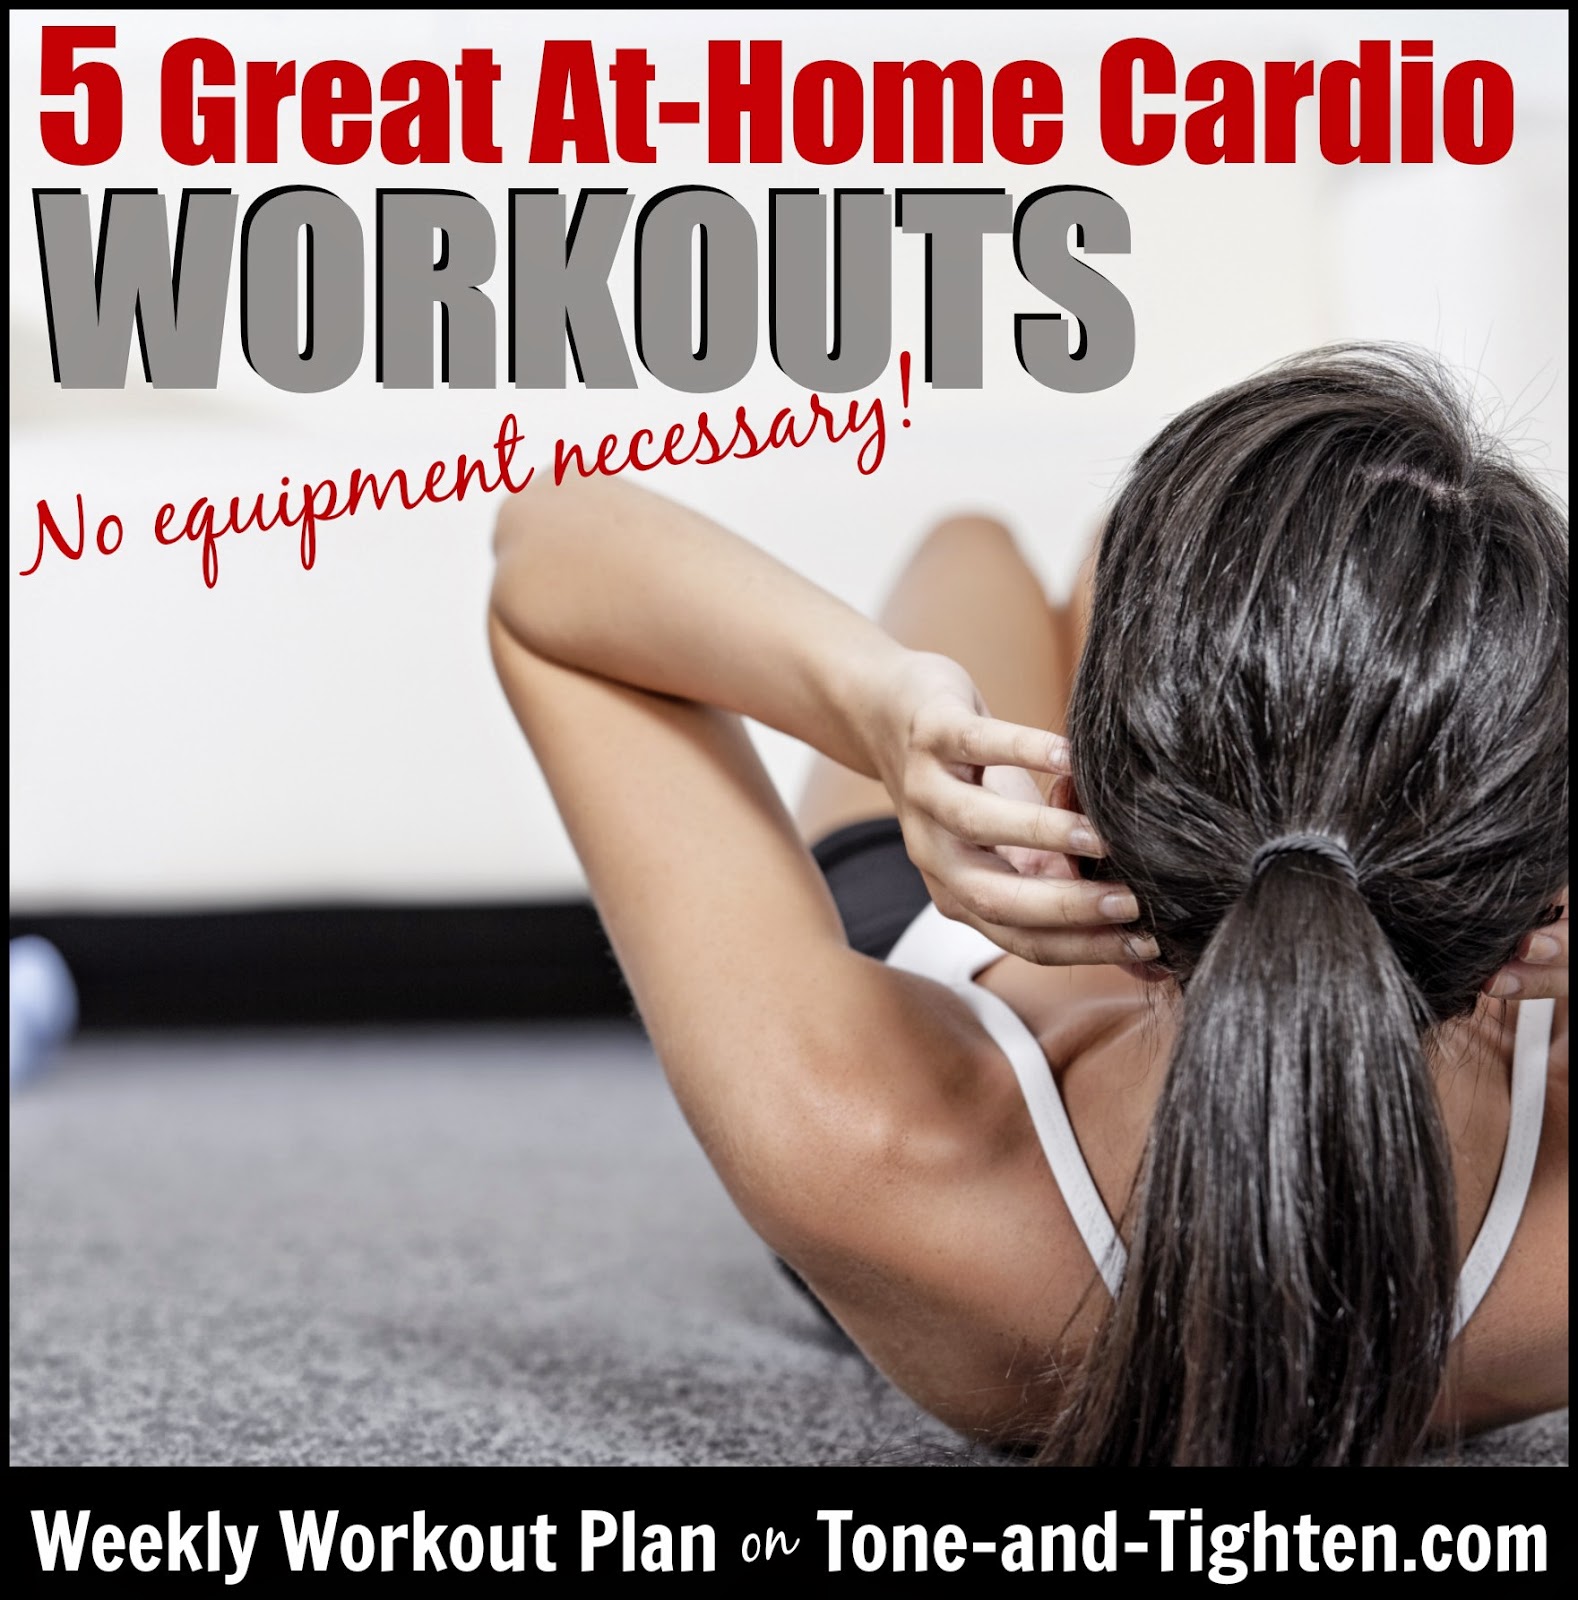 5 At-Home Workouts To Burn Calories and Melt Fat – Perfect to get ready for Thanksgiving!